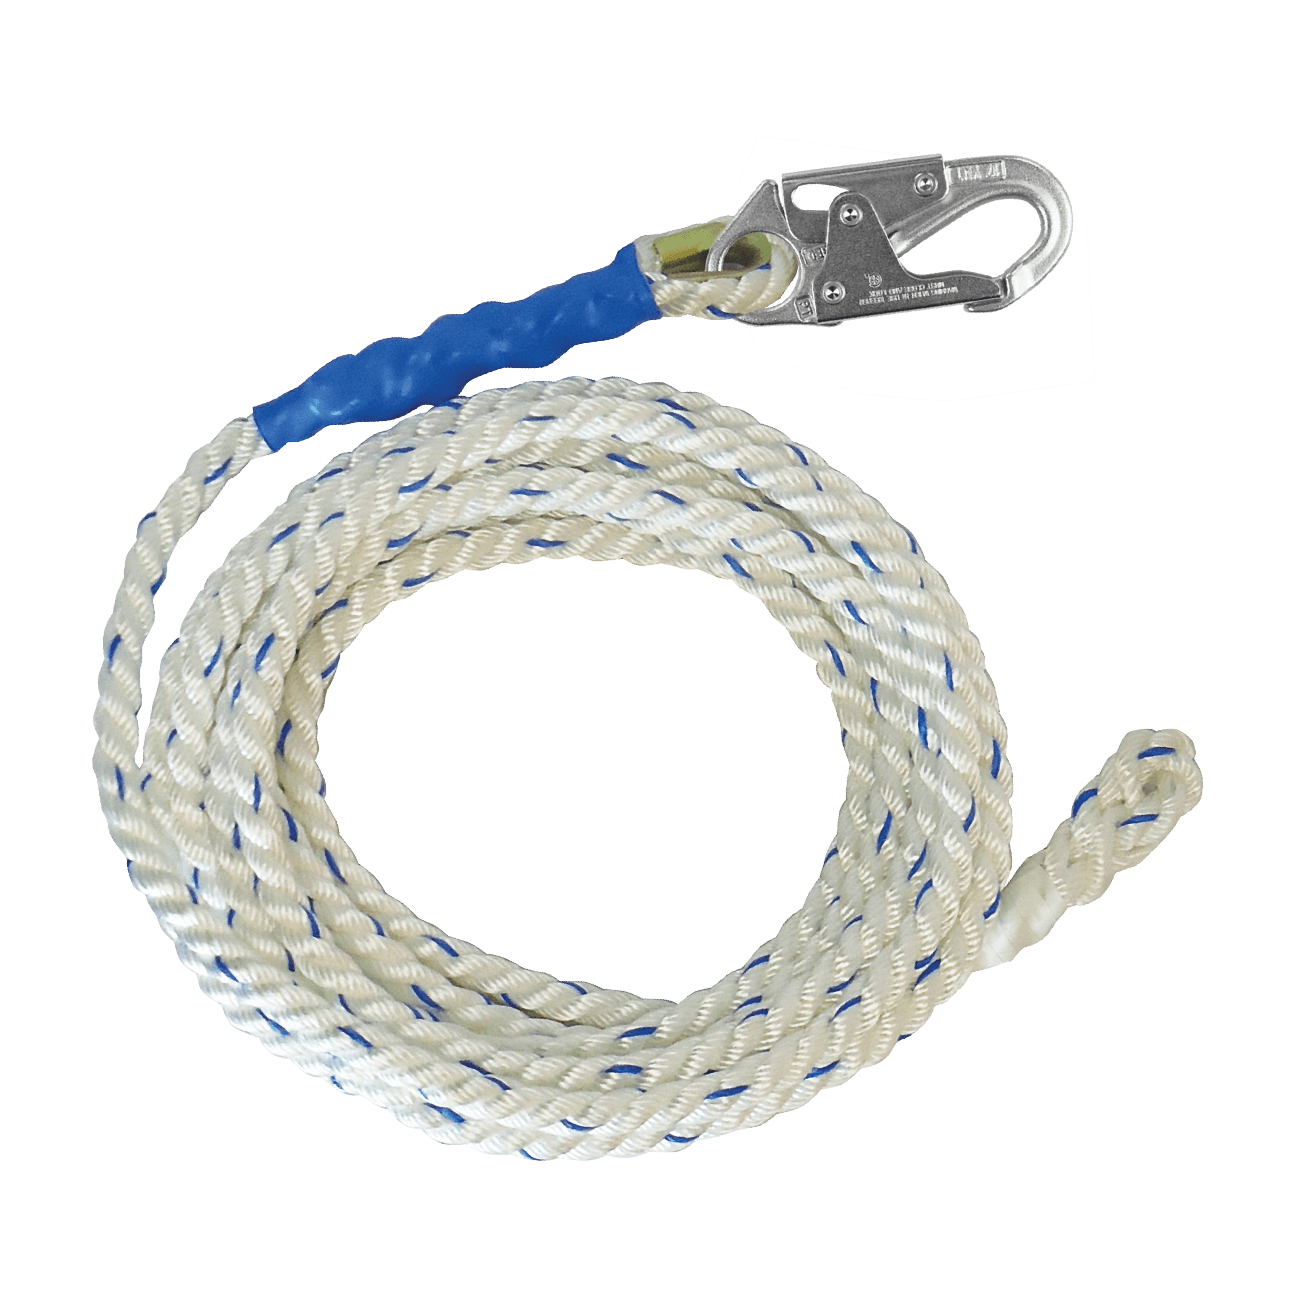 Premium Polyester Blend Vertical Lifeline with Back-spliced End - CSA